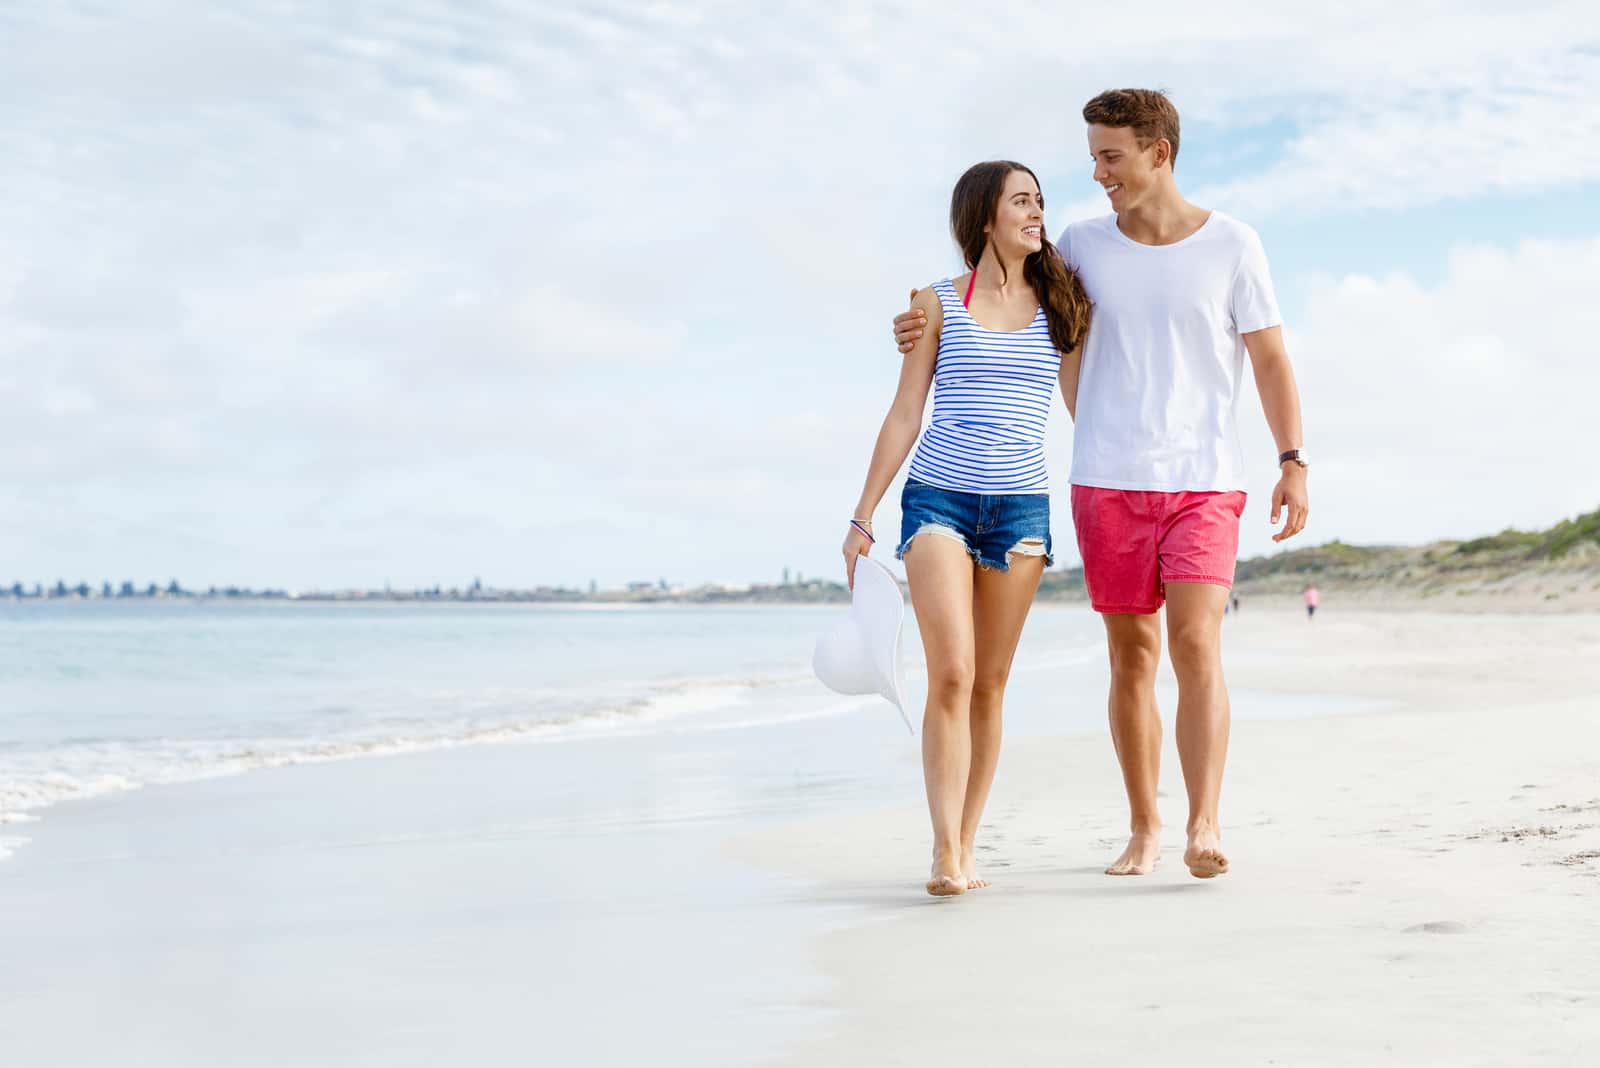 a man and a woman are walking along the beach and laughing